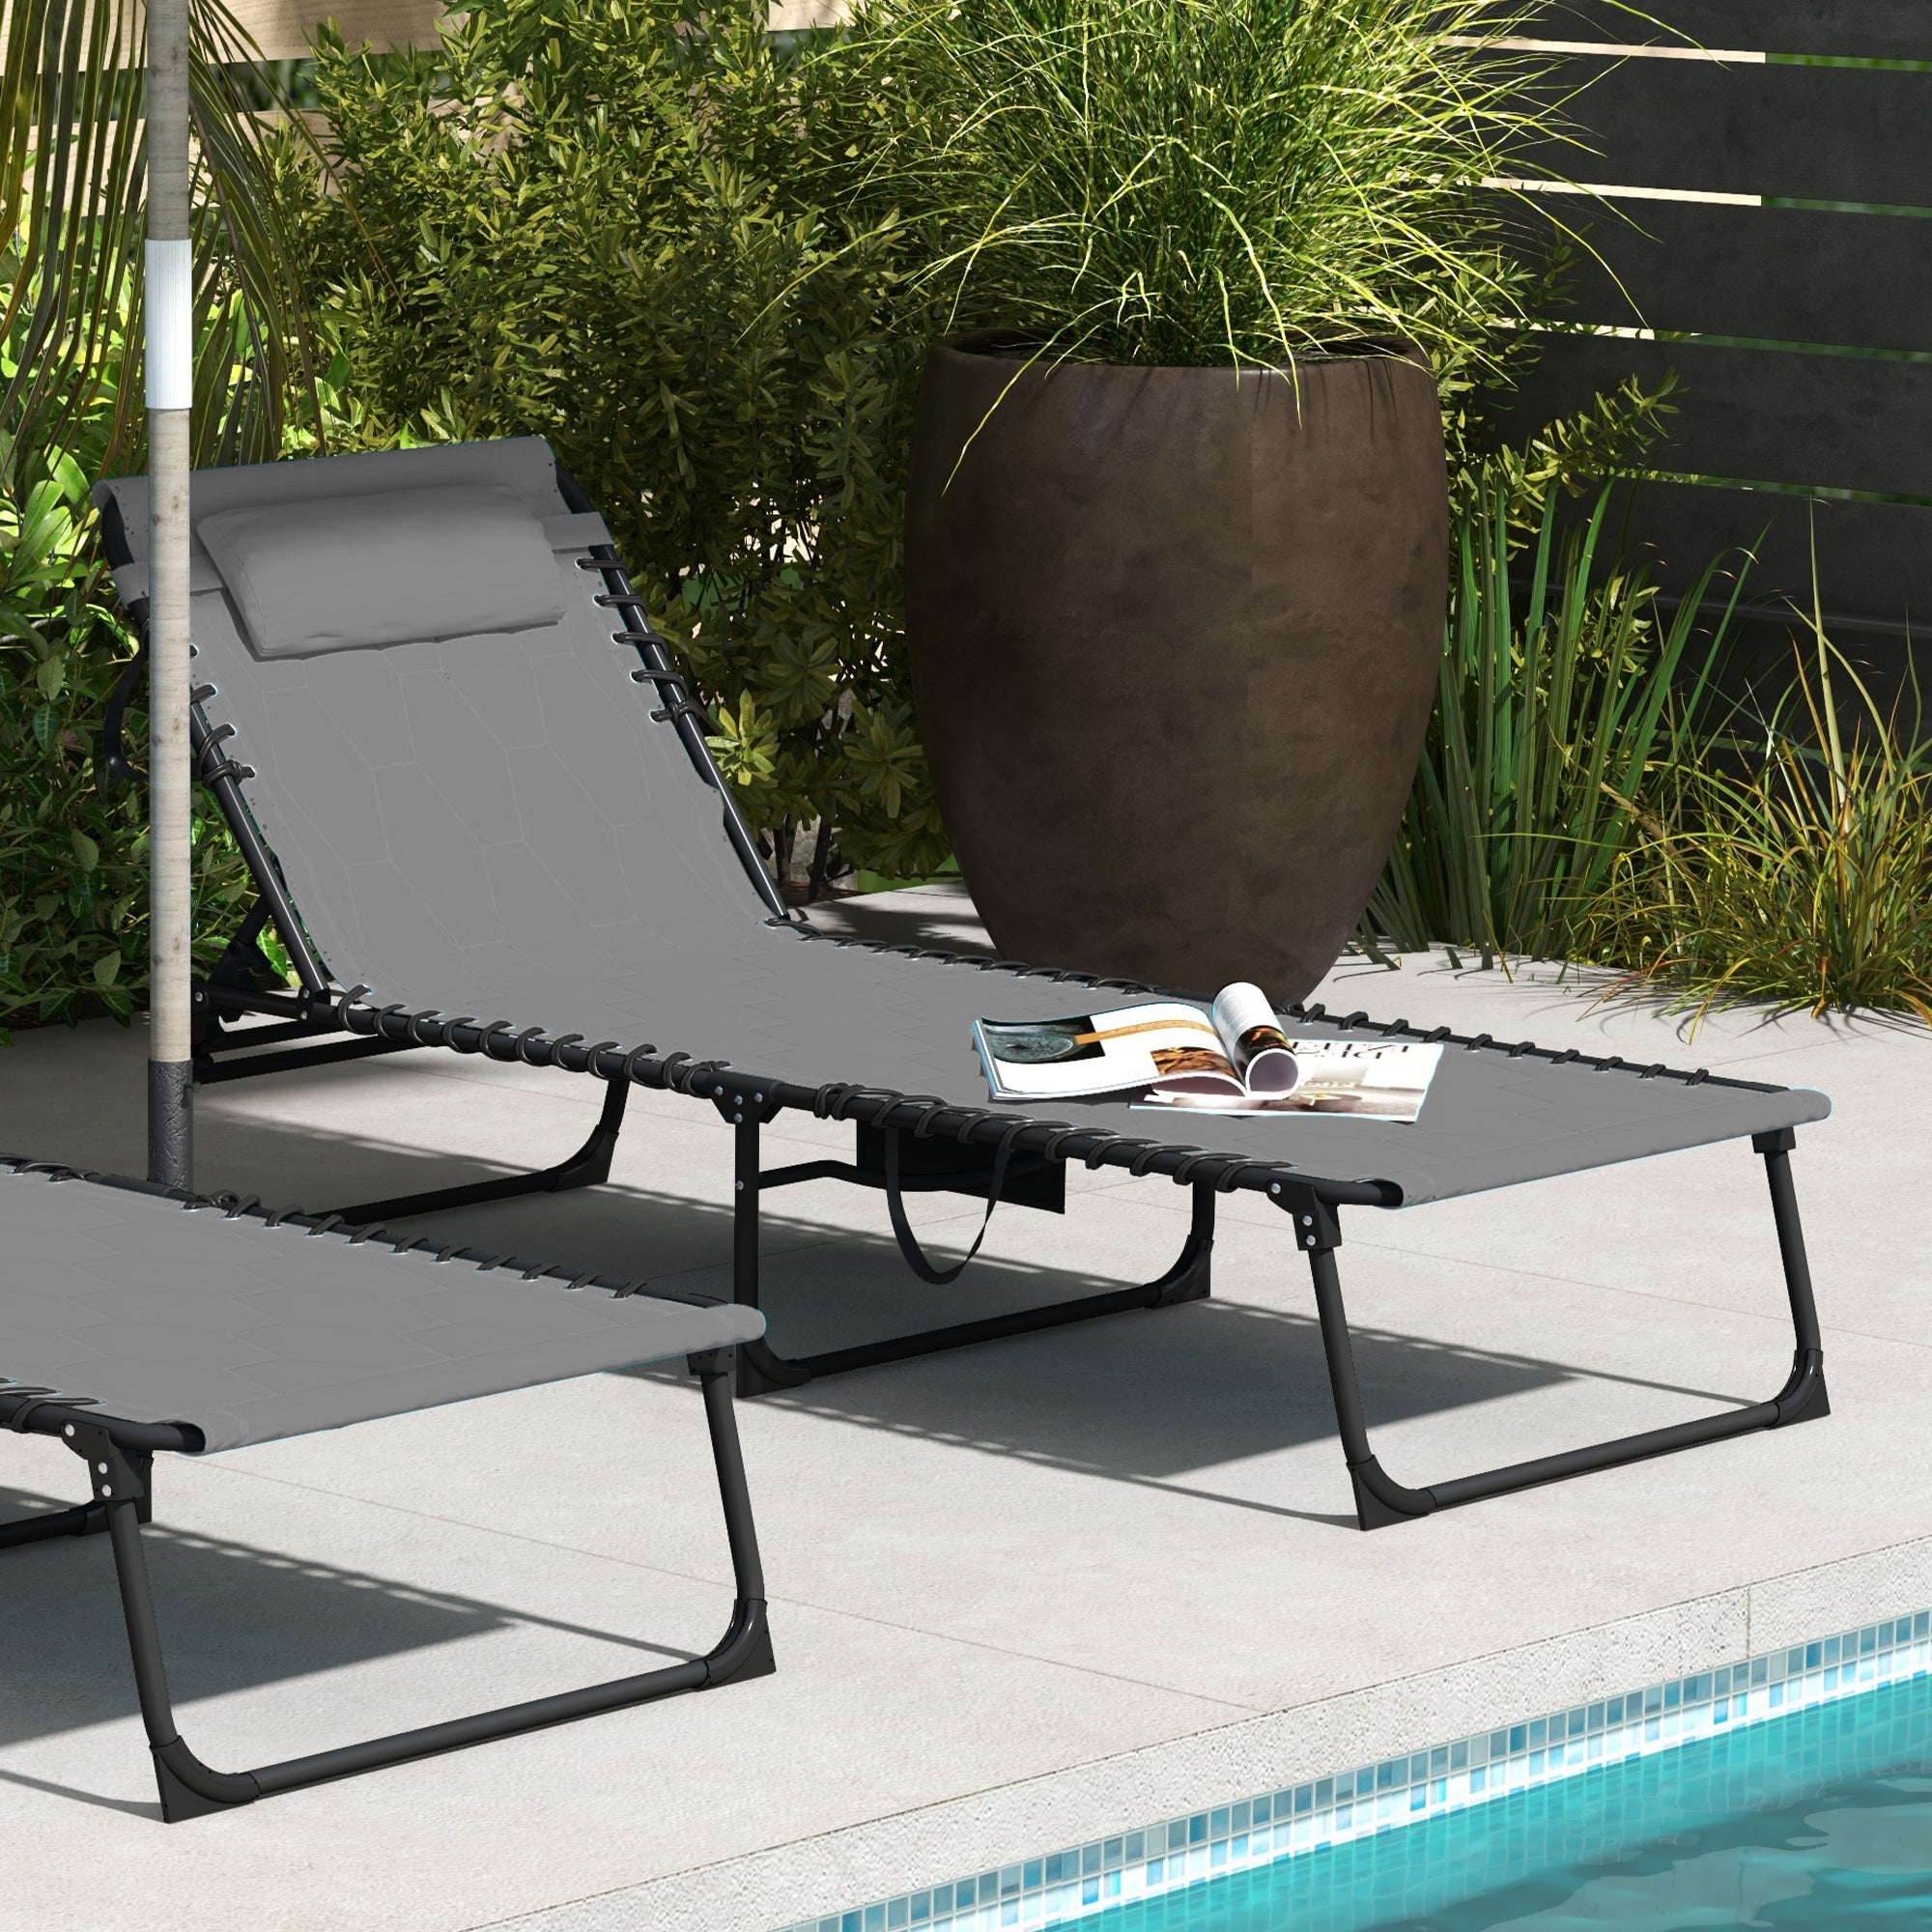 Outsunny Foldable Sun Lounger with 5-level Reclining Back, Outdoor Tanning Chair w/ Padded Seat, Outdoor Sun Lounger with Side Pocket